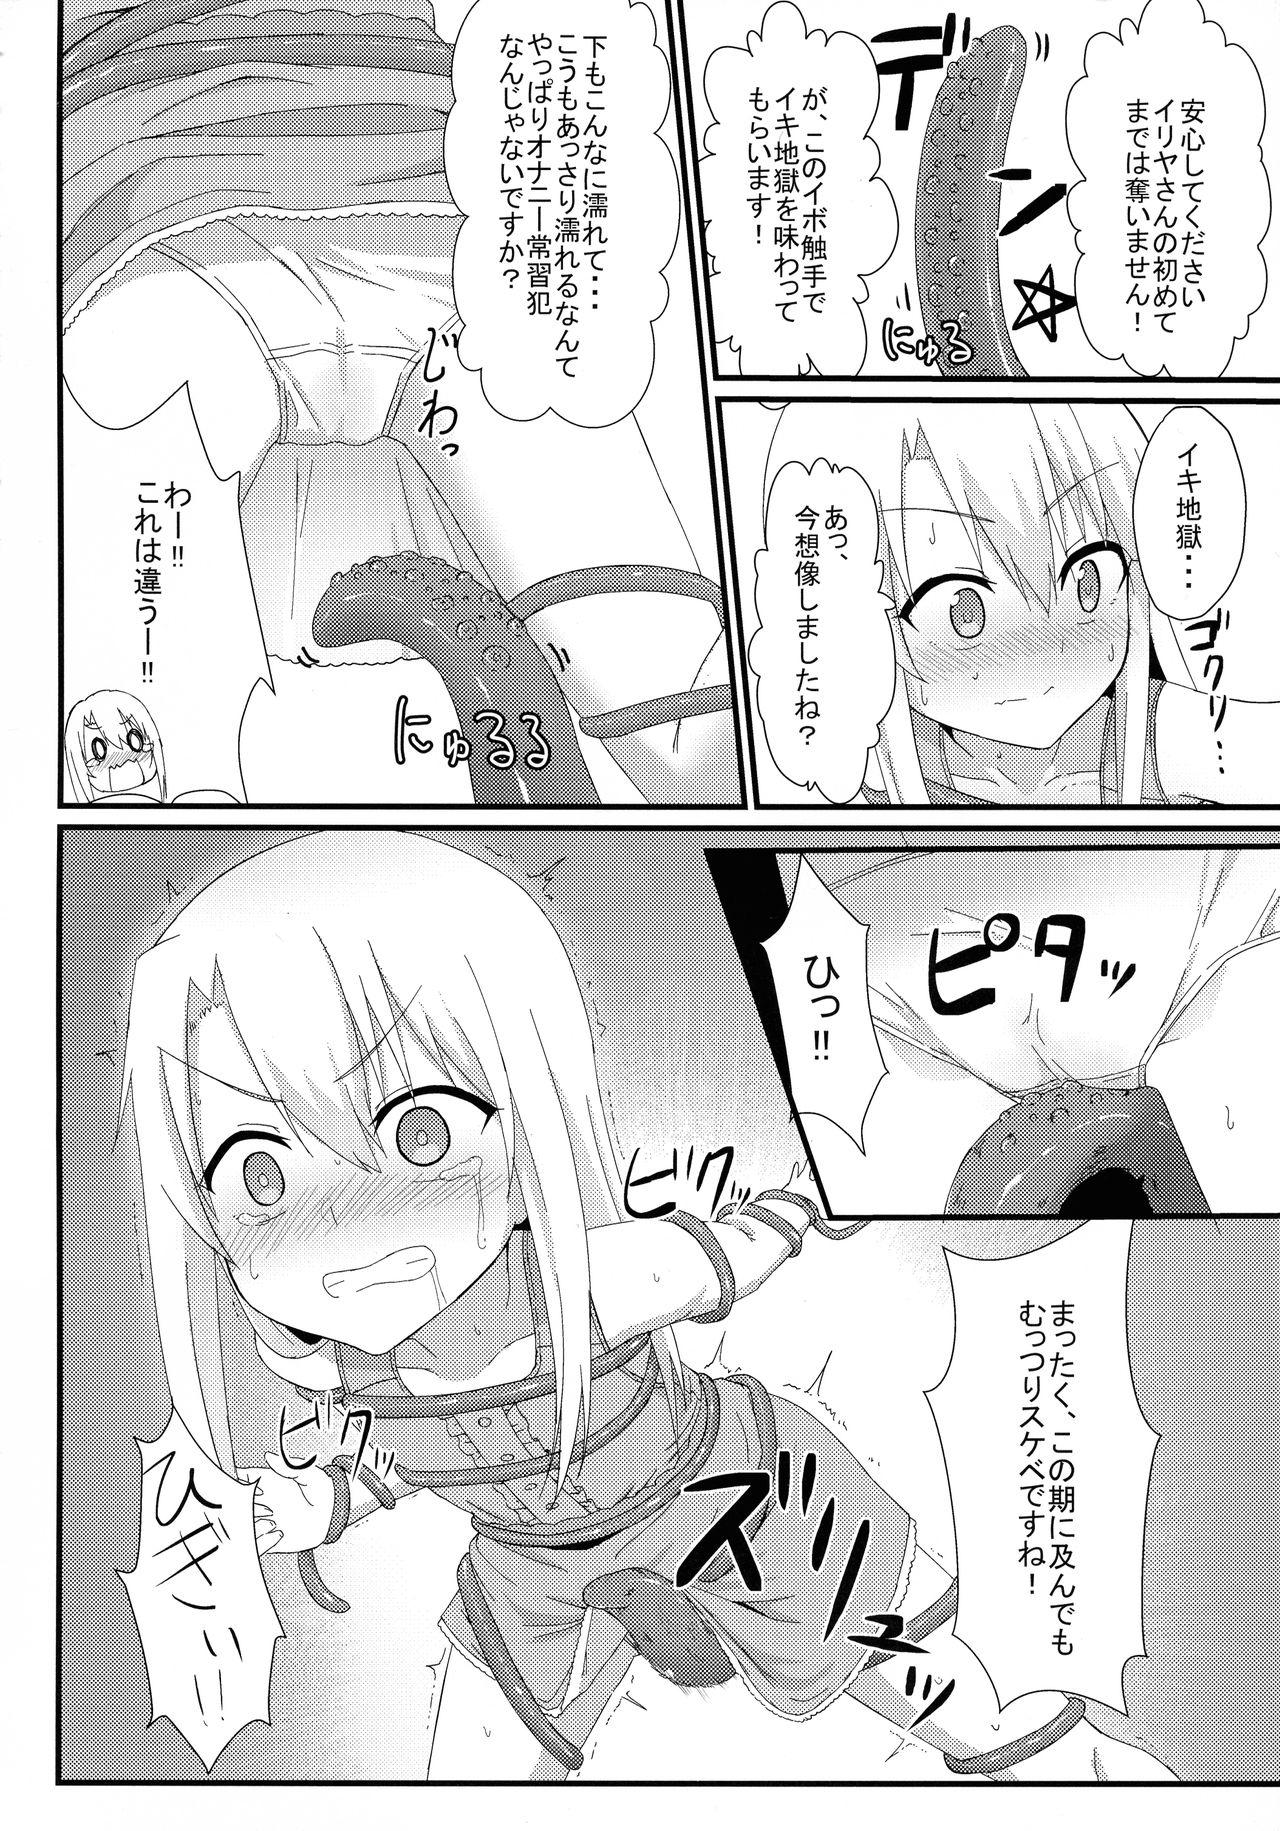 Face Illya to Ruby Etchi Etchi Secret Function - Fate kaleid liner prisma illya Cuckolding - Page 6